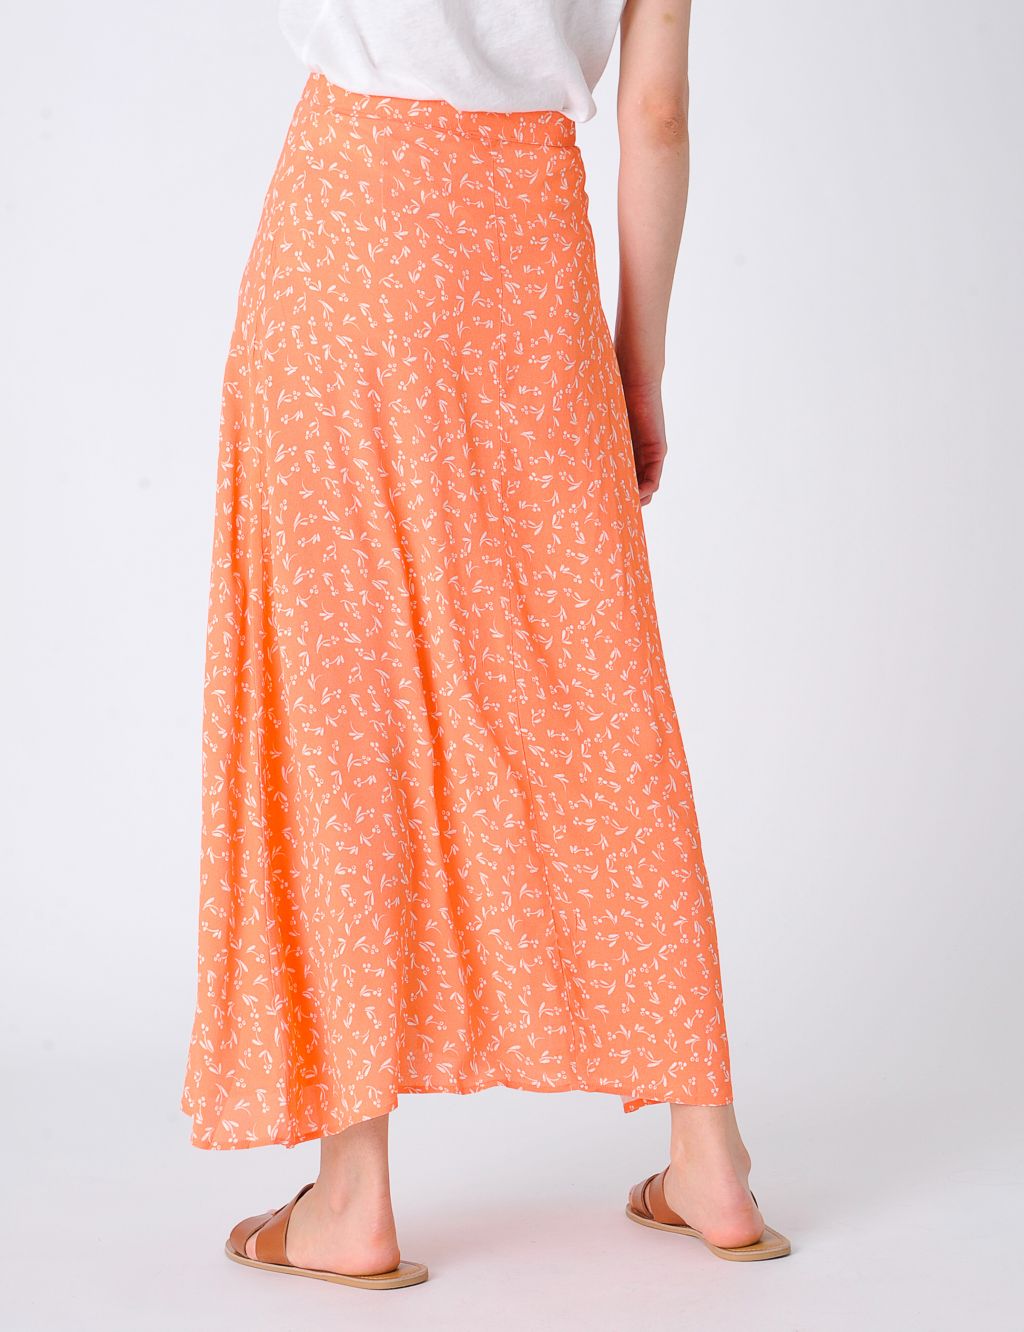 Printed Button Front Midi A-Line Skirt image 3